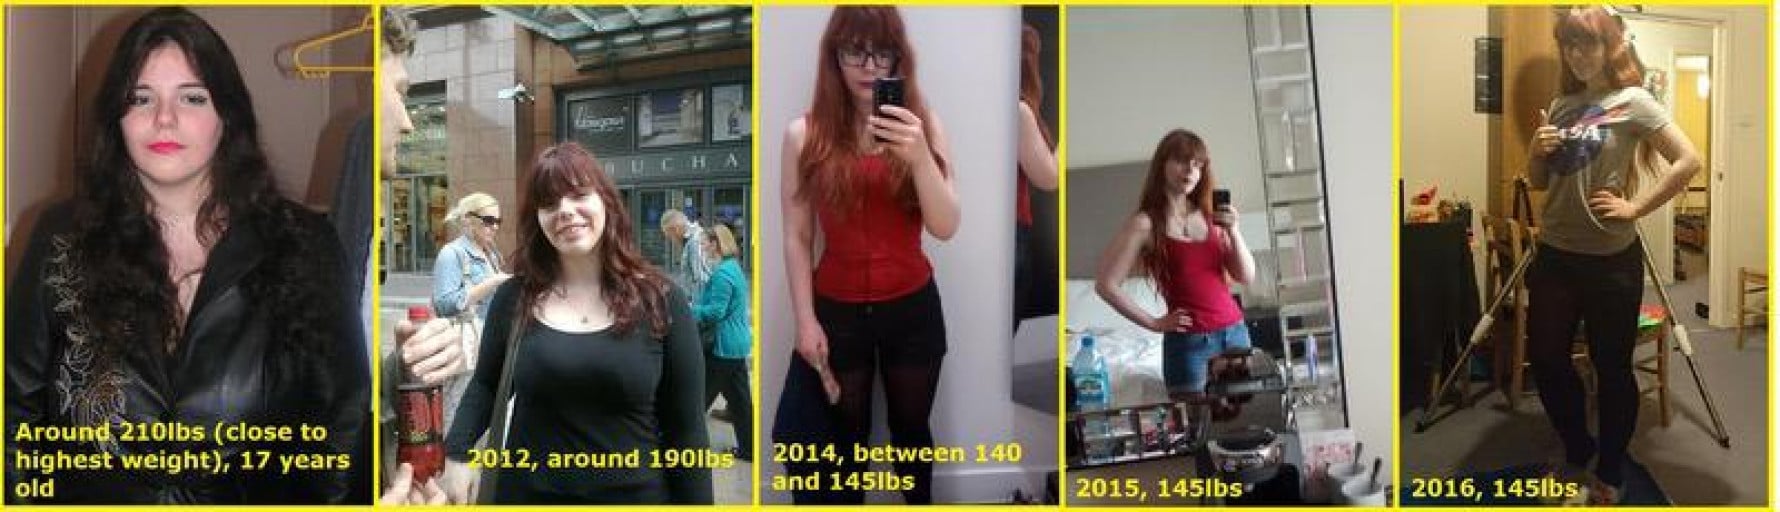 From 225Lbs to 145Lbs: a Two Year Weight Loss Journey